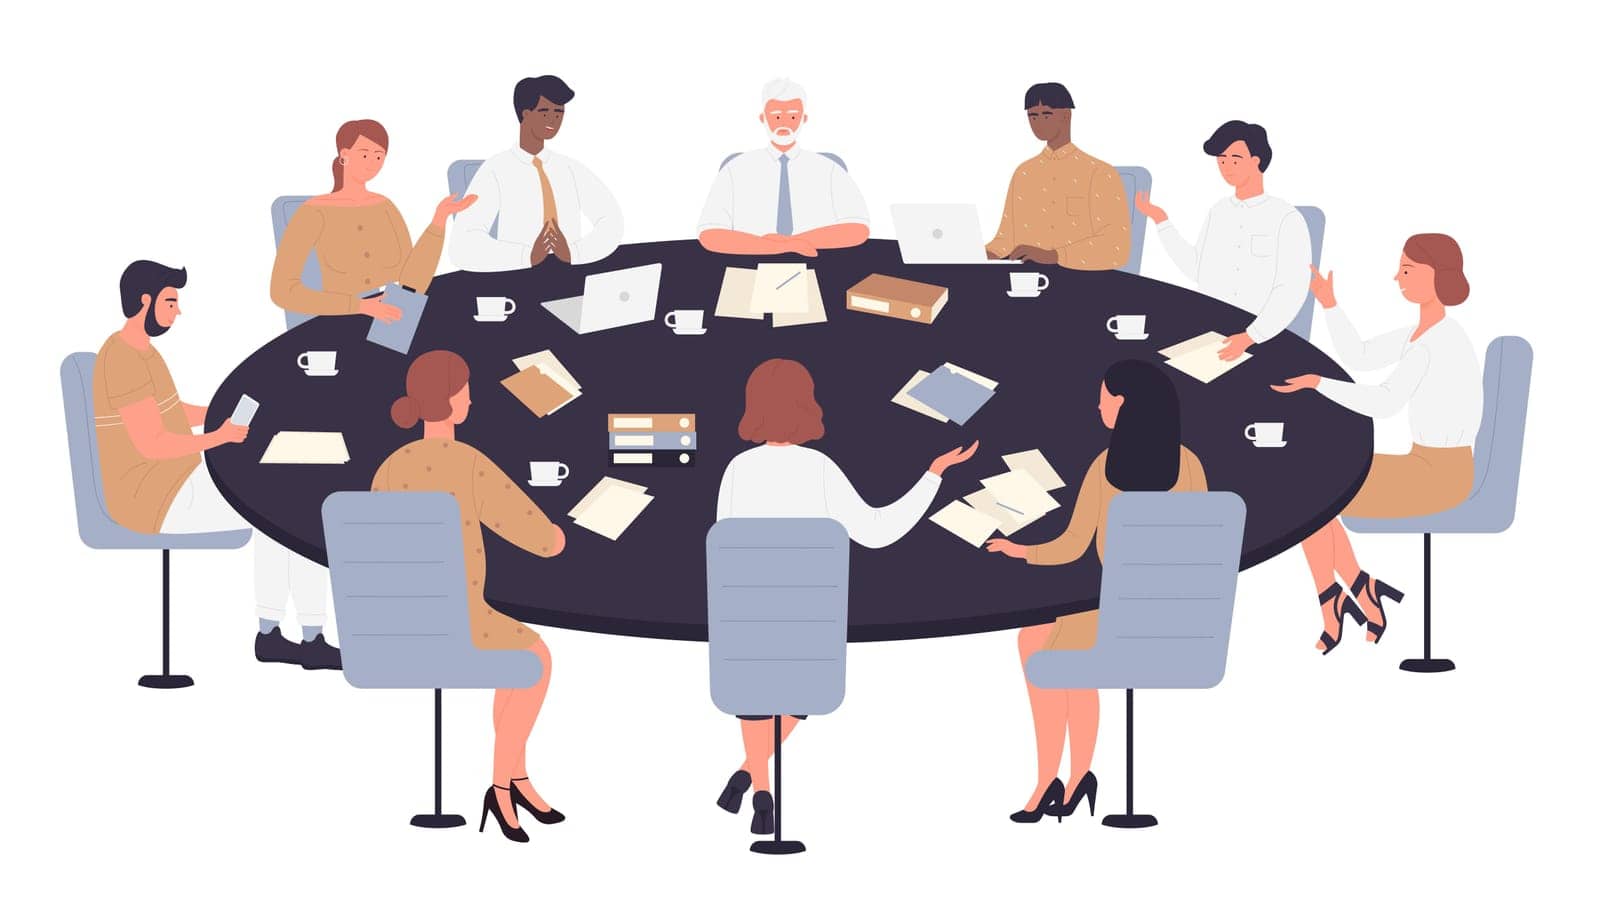 Work meeting, business negotiation, conference, group discussion. Politicians, directors or corporate leaders people negotiate, sitting round table discussing ideas vector illustration.